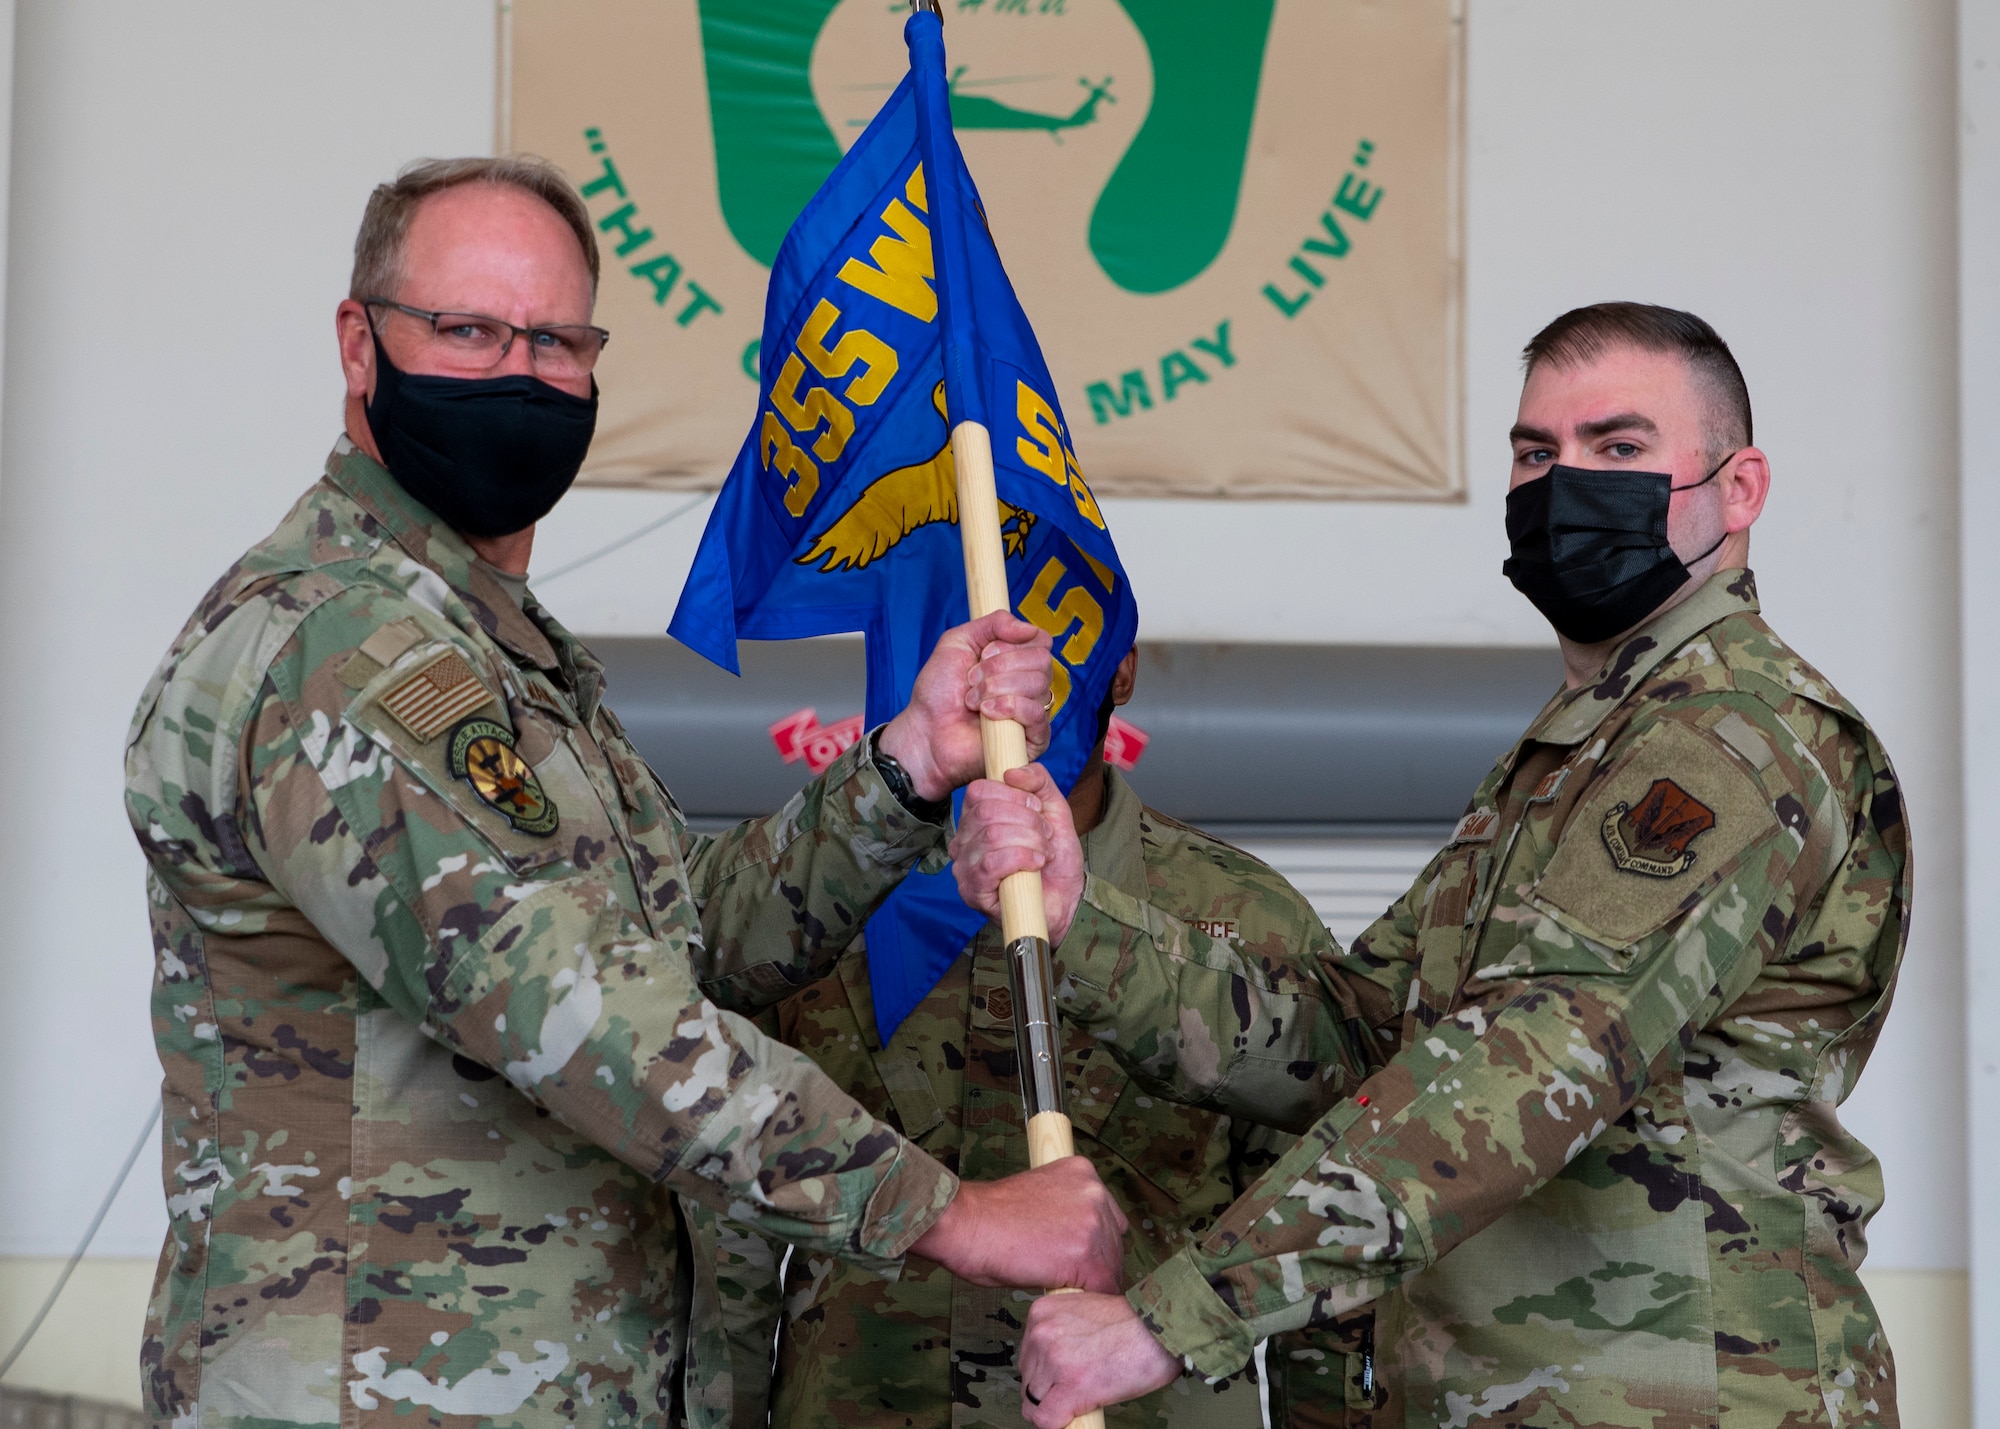 Two men pose holding a guidon.